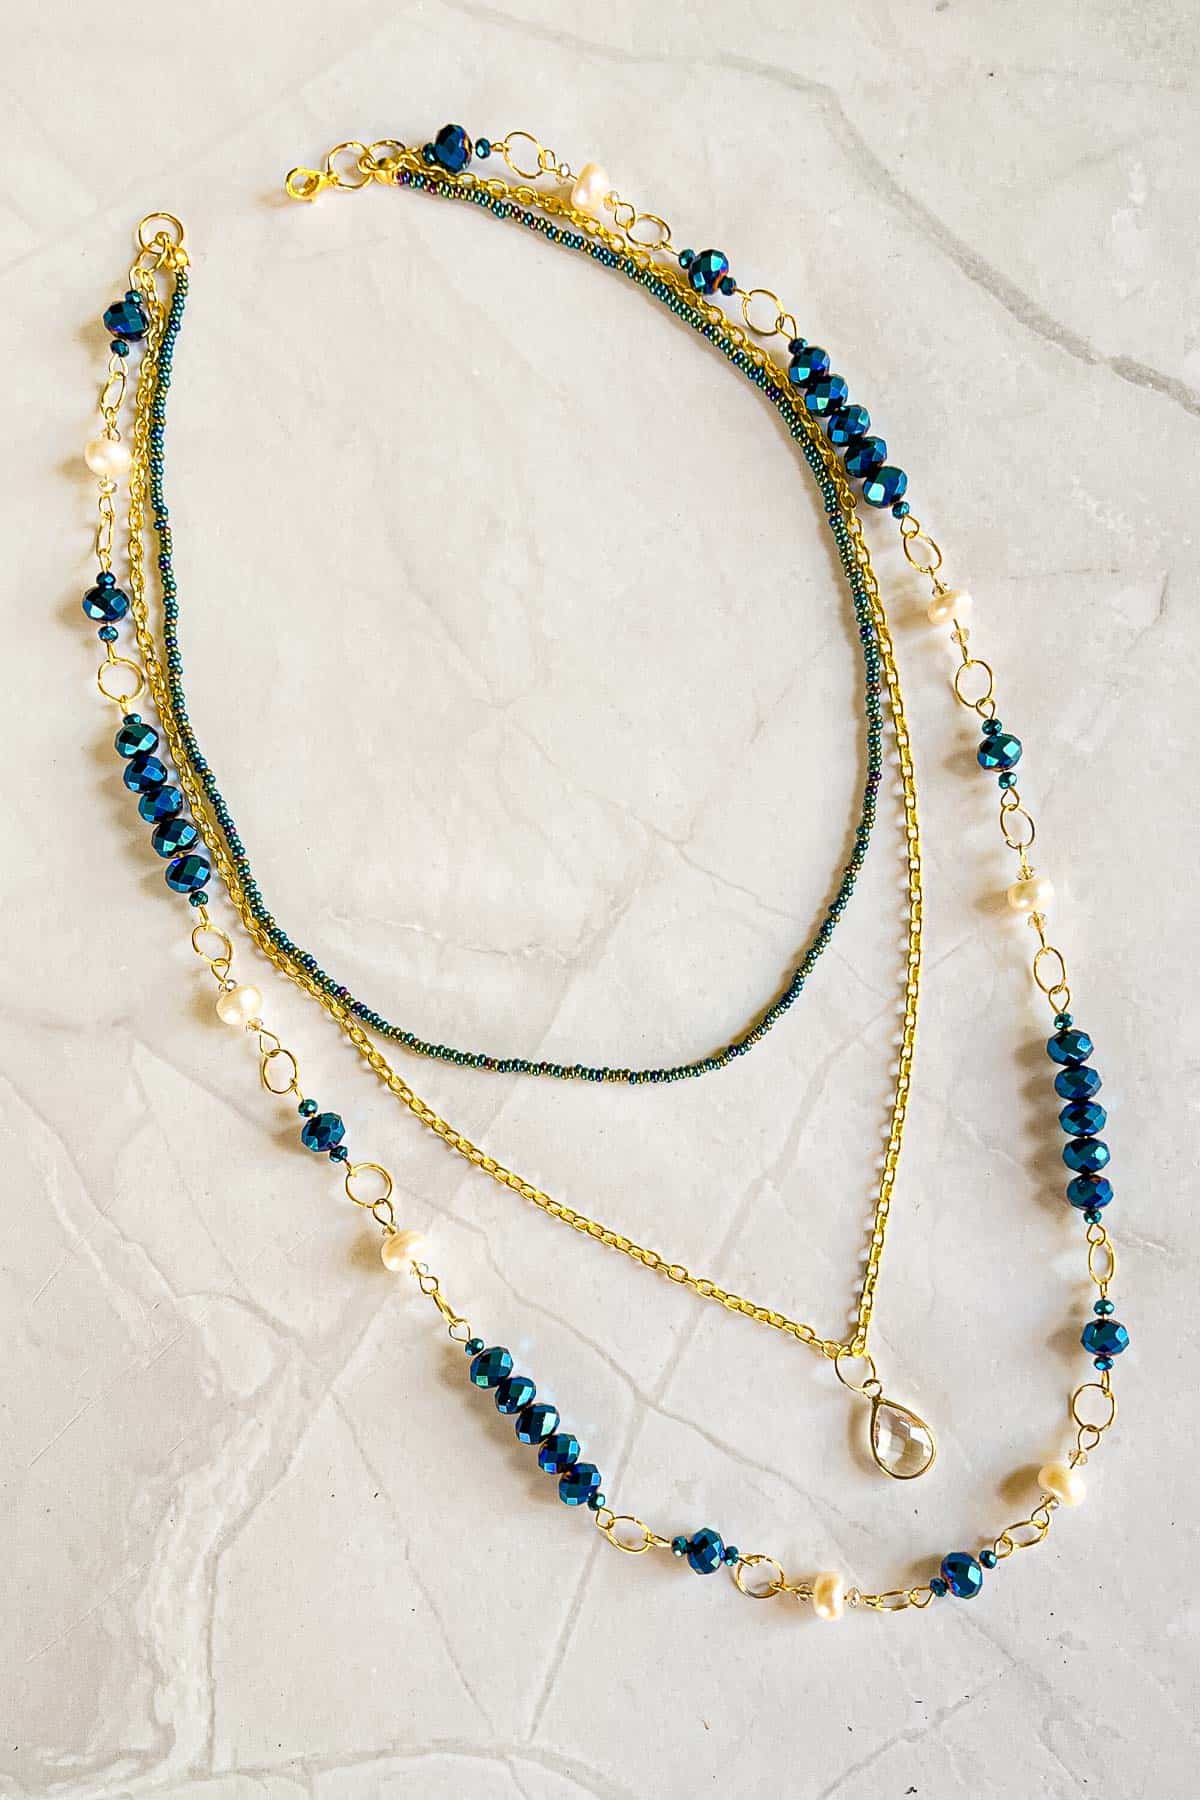 A multi strand necklace with a layer of seed beads, link chain with teardrop pendant and blue and white bead link chain.